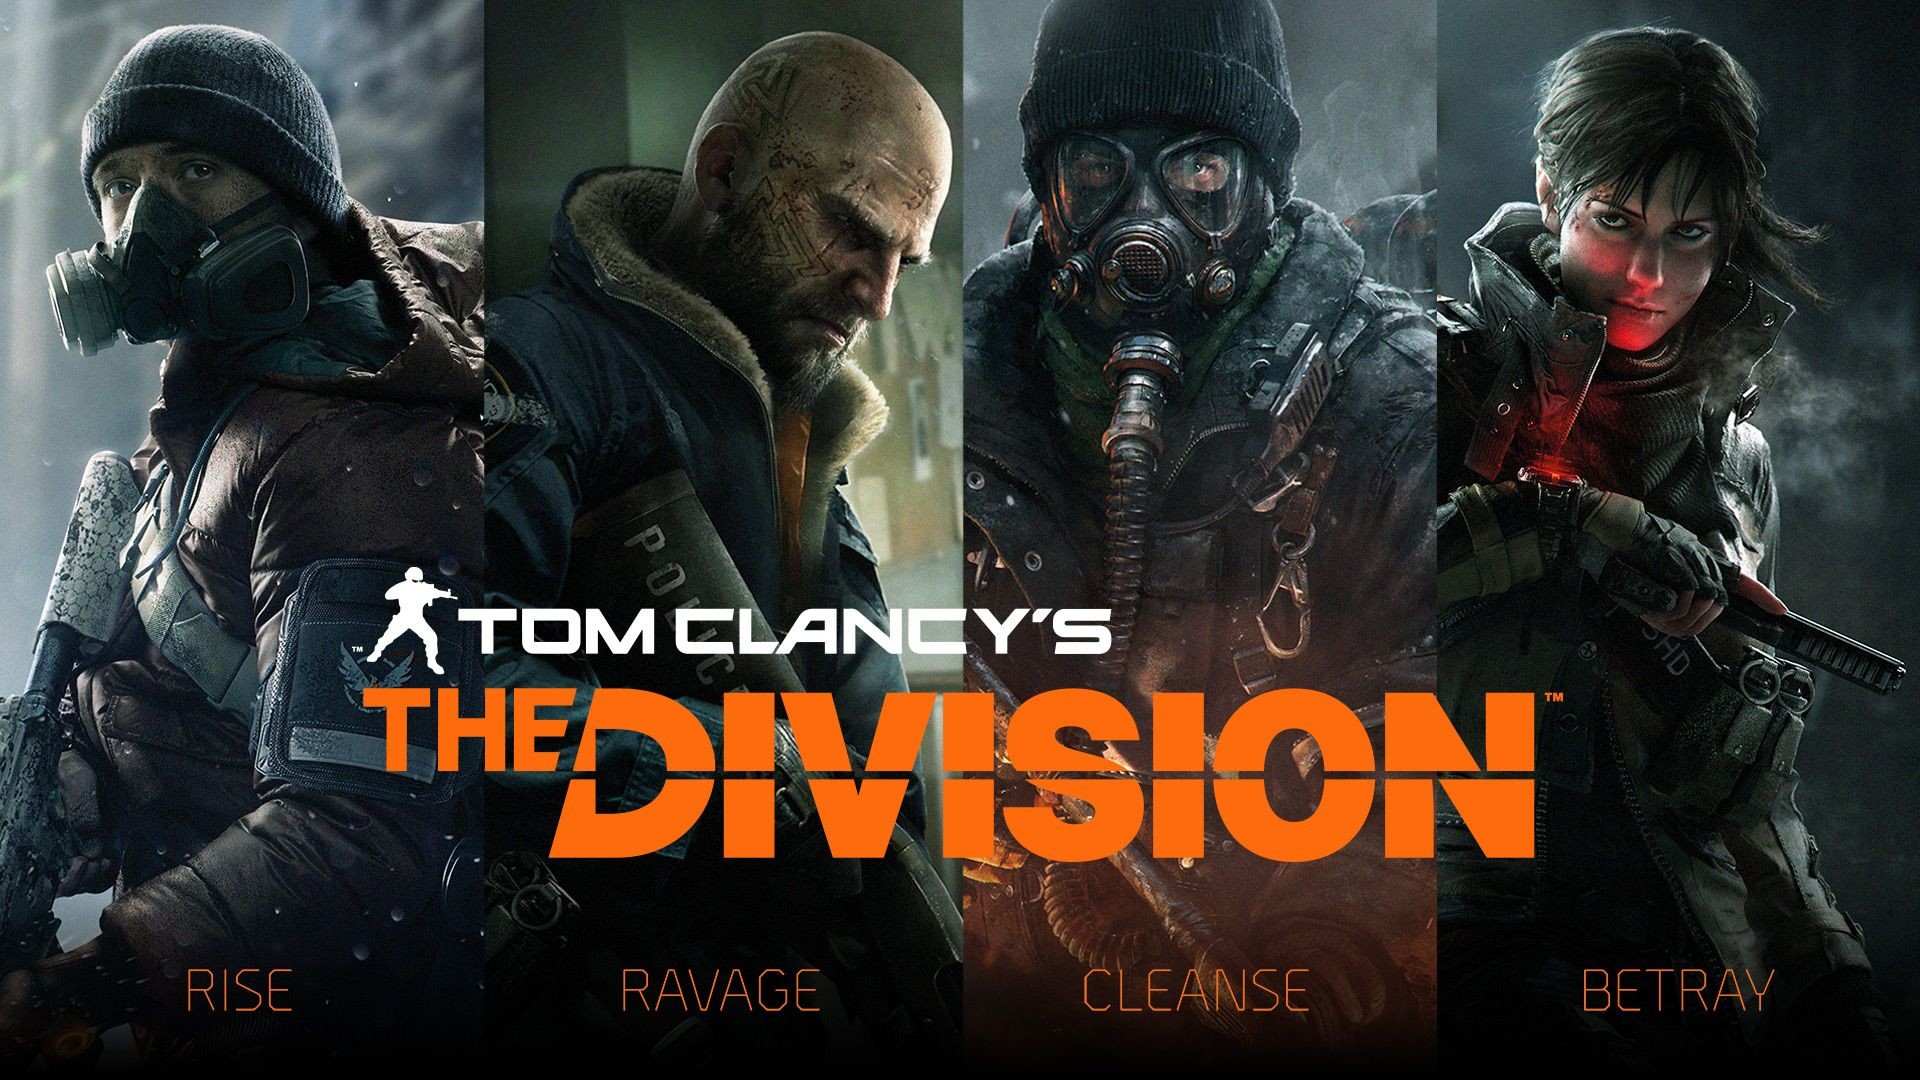 1920x1080 tom clancys the division poster - 1080 x 1920 HD Backgrounds, High  Definition wallpapers for Desktop, Dual Monitors, Laptop, Tablet